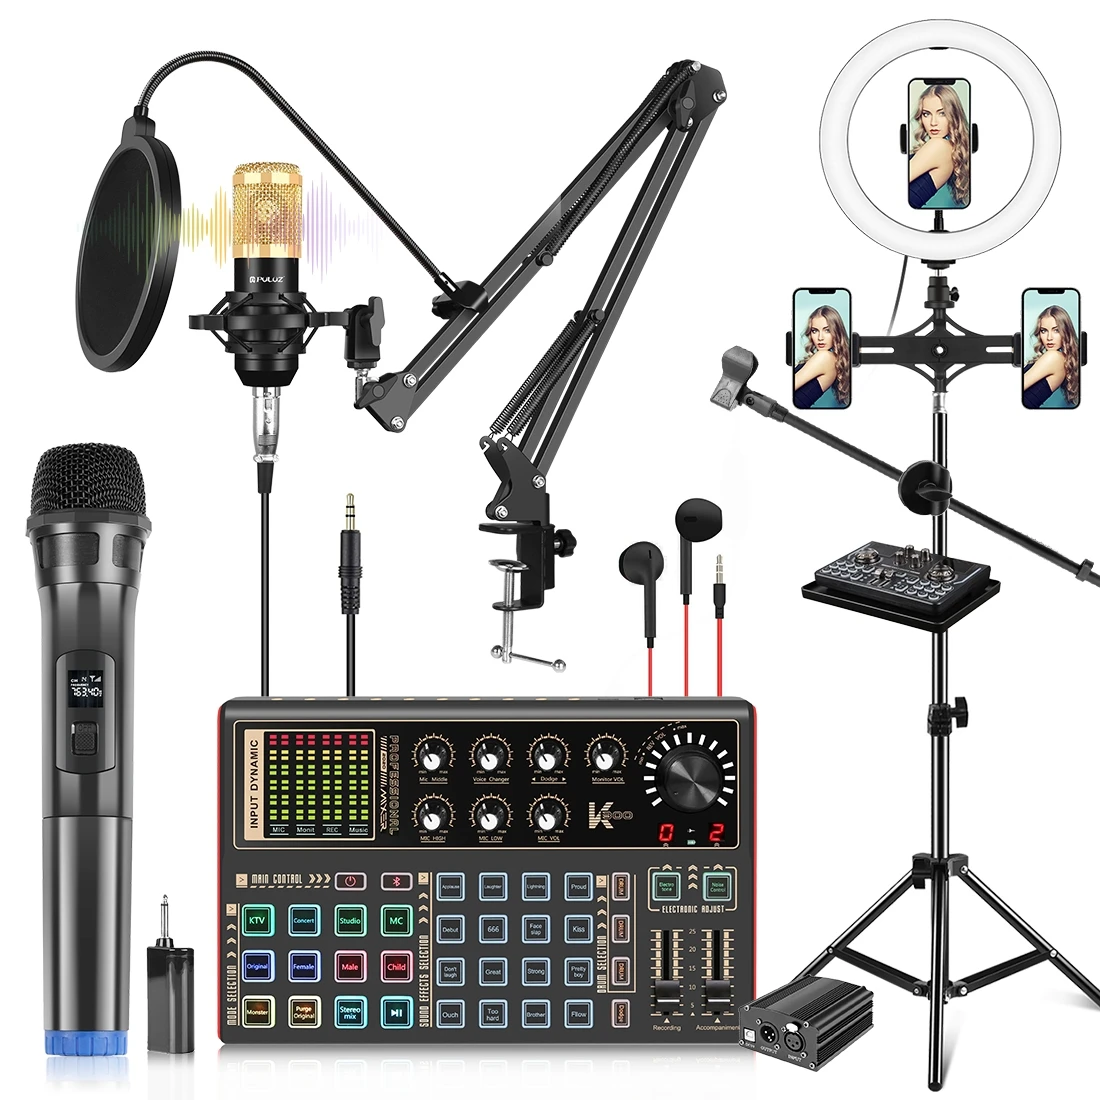 

PULUZ Professional Microphone Live Sound Card Kit with Phantom Power and 1.6m Stand Selfie Ring Light Usb Live Sound Card